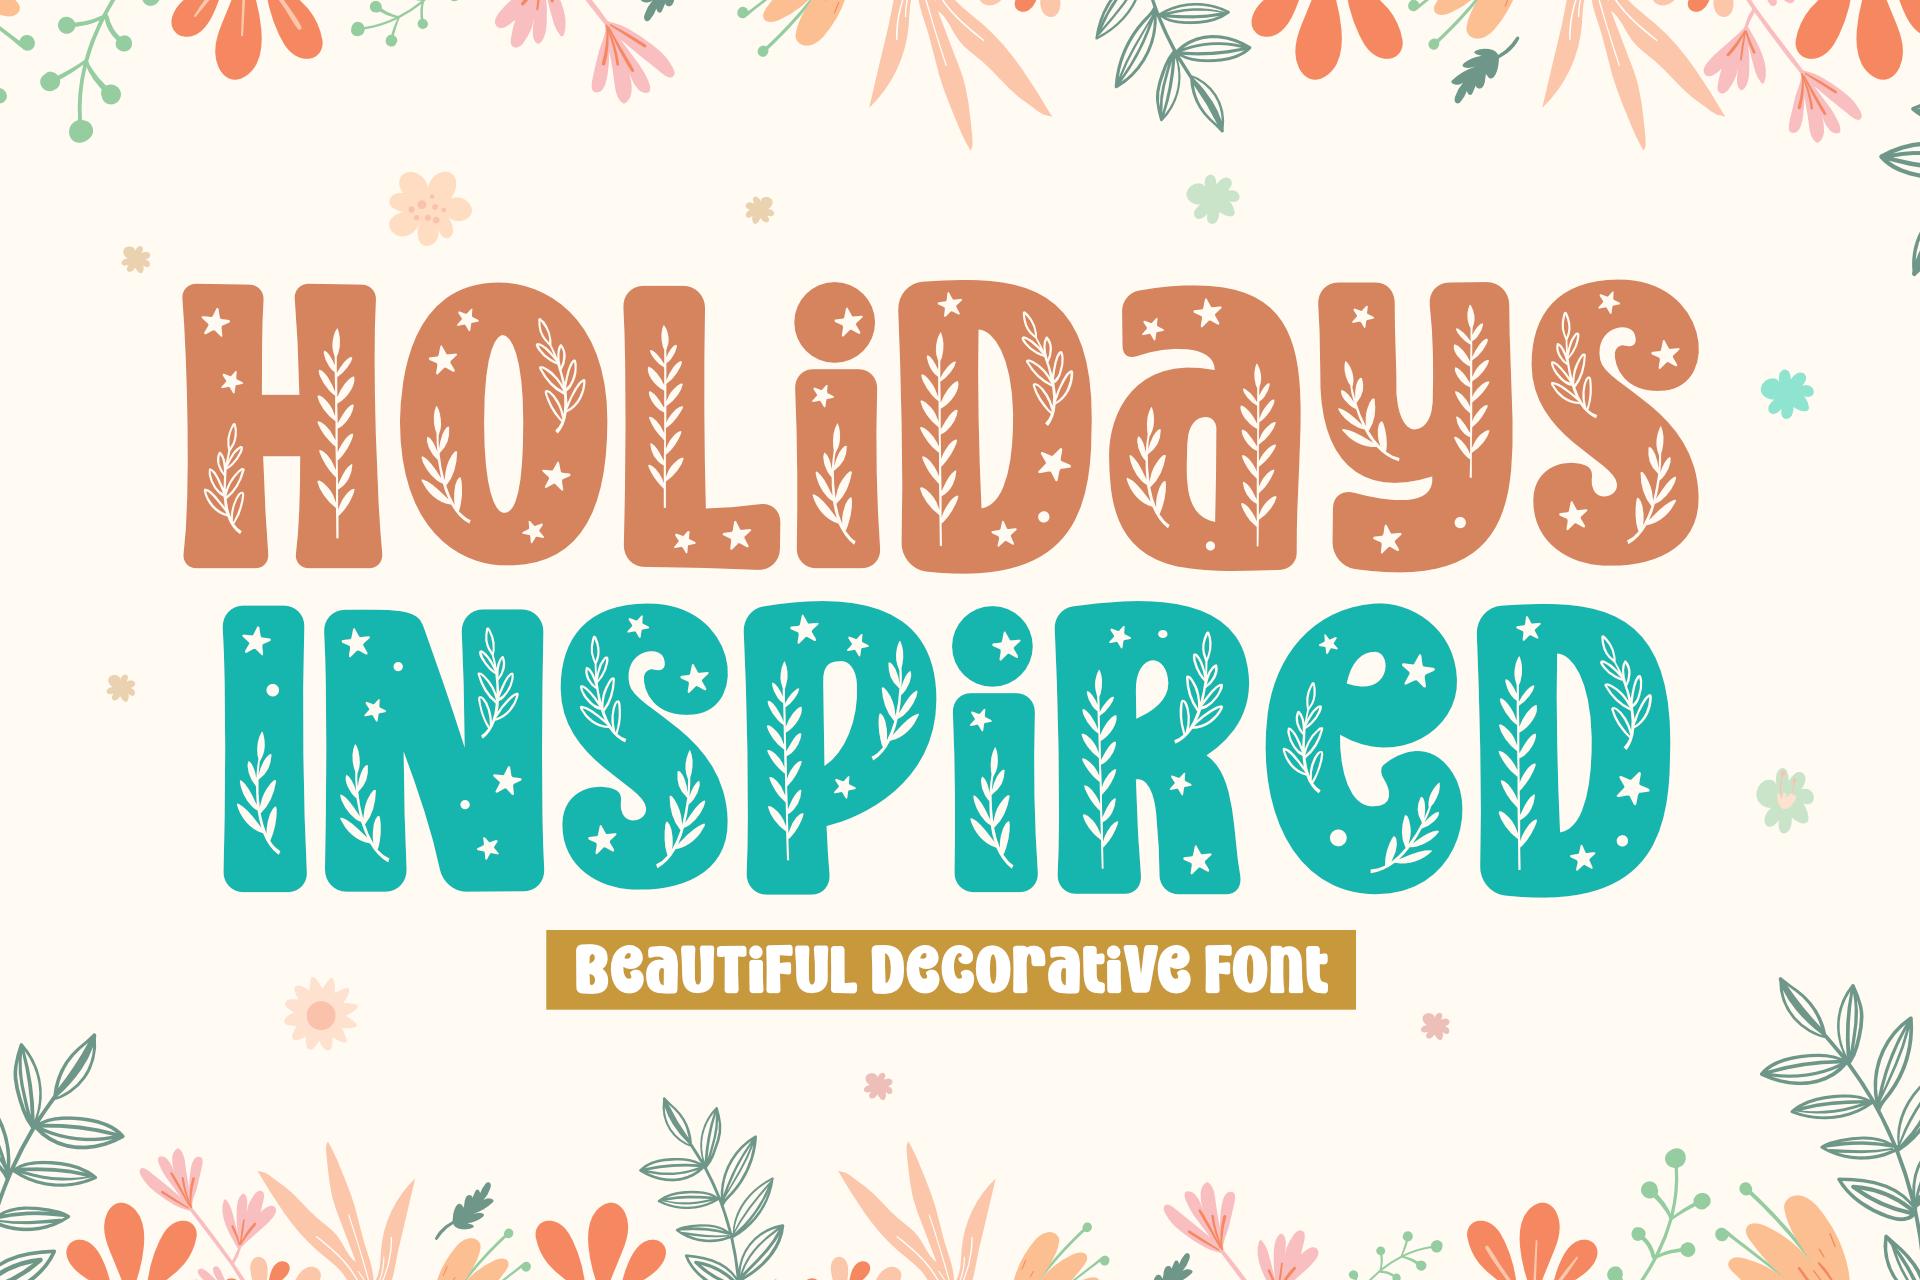 Holidays Inspired Font